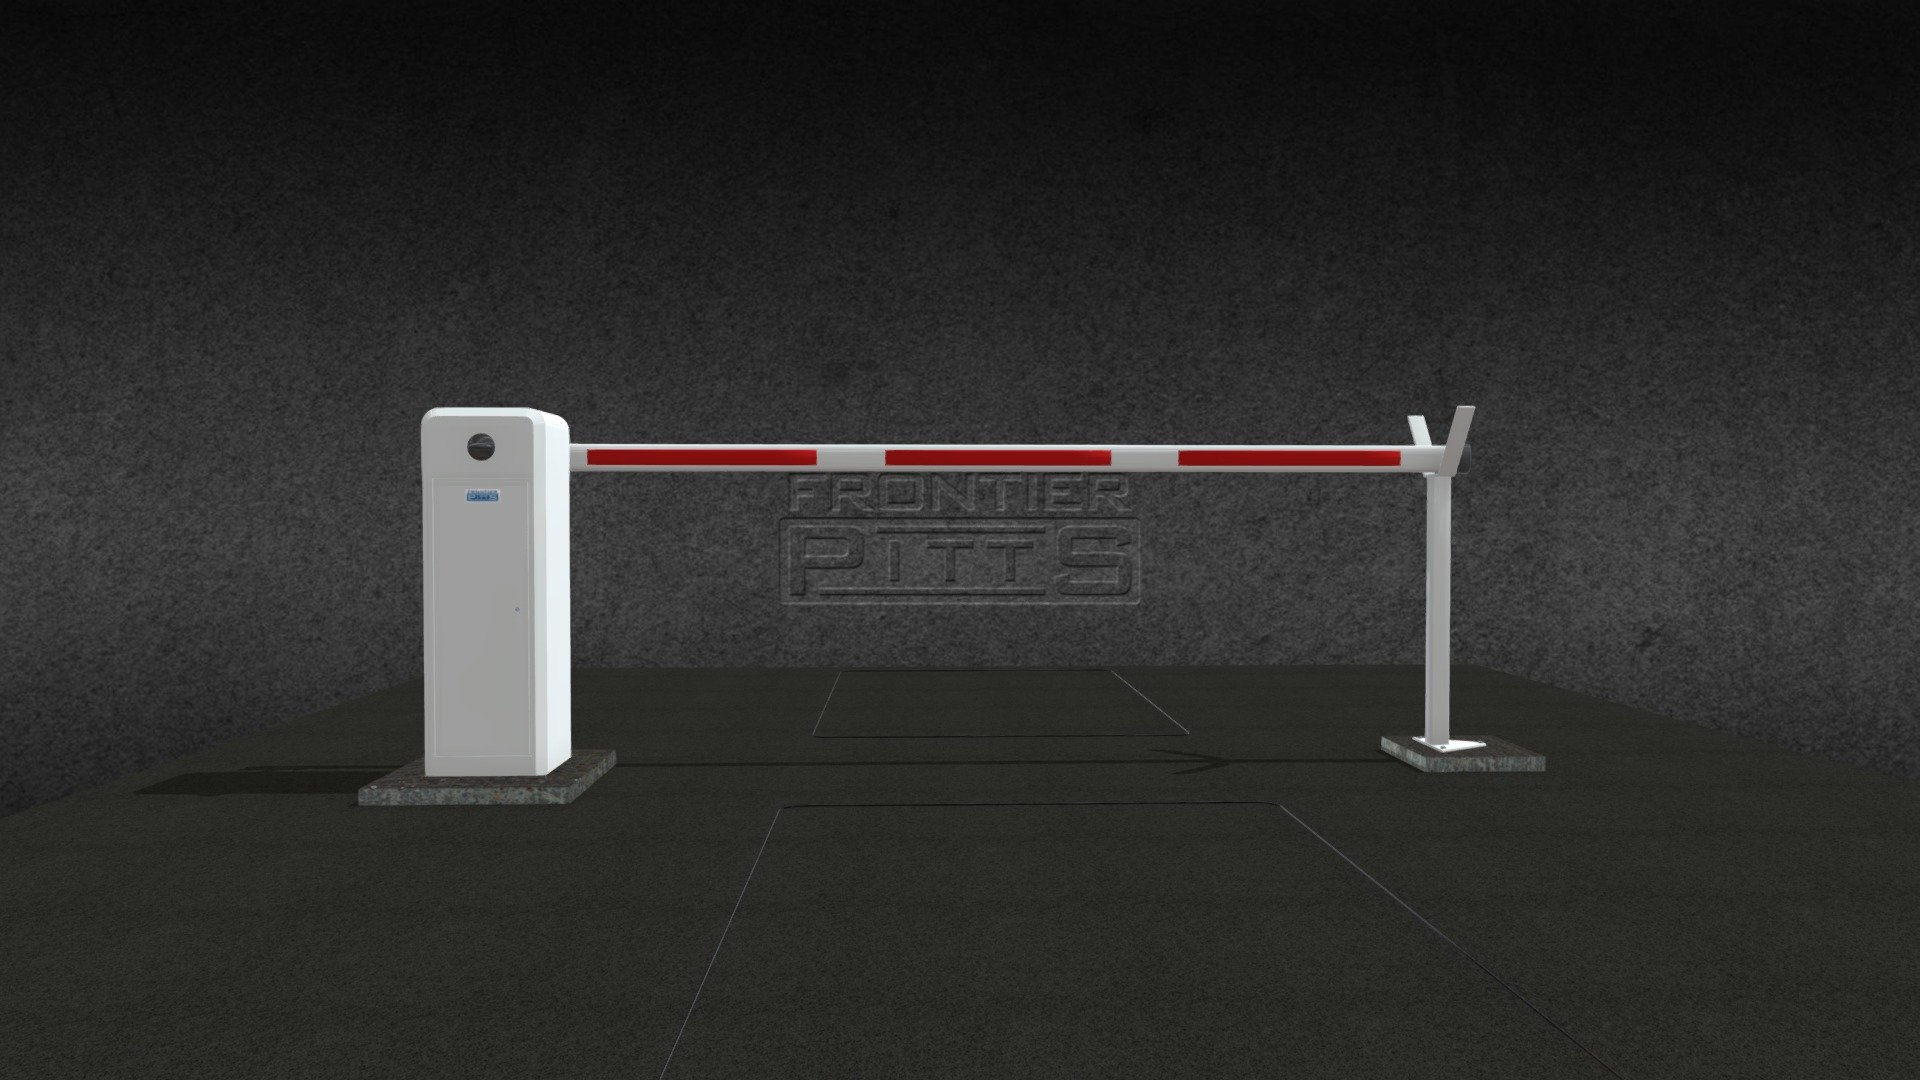 Frontier Pitts Automatic Rising Arm Barrier model FBA - 36 - FBA - 3D model by Frontier Pitts Ltd. (@frontierpitts) 3d model